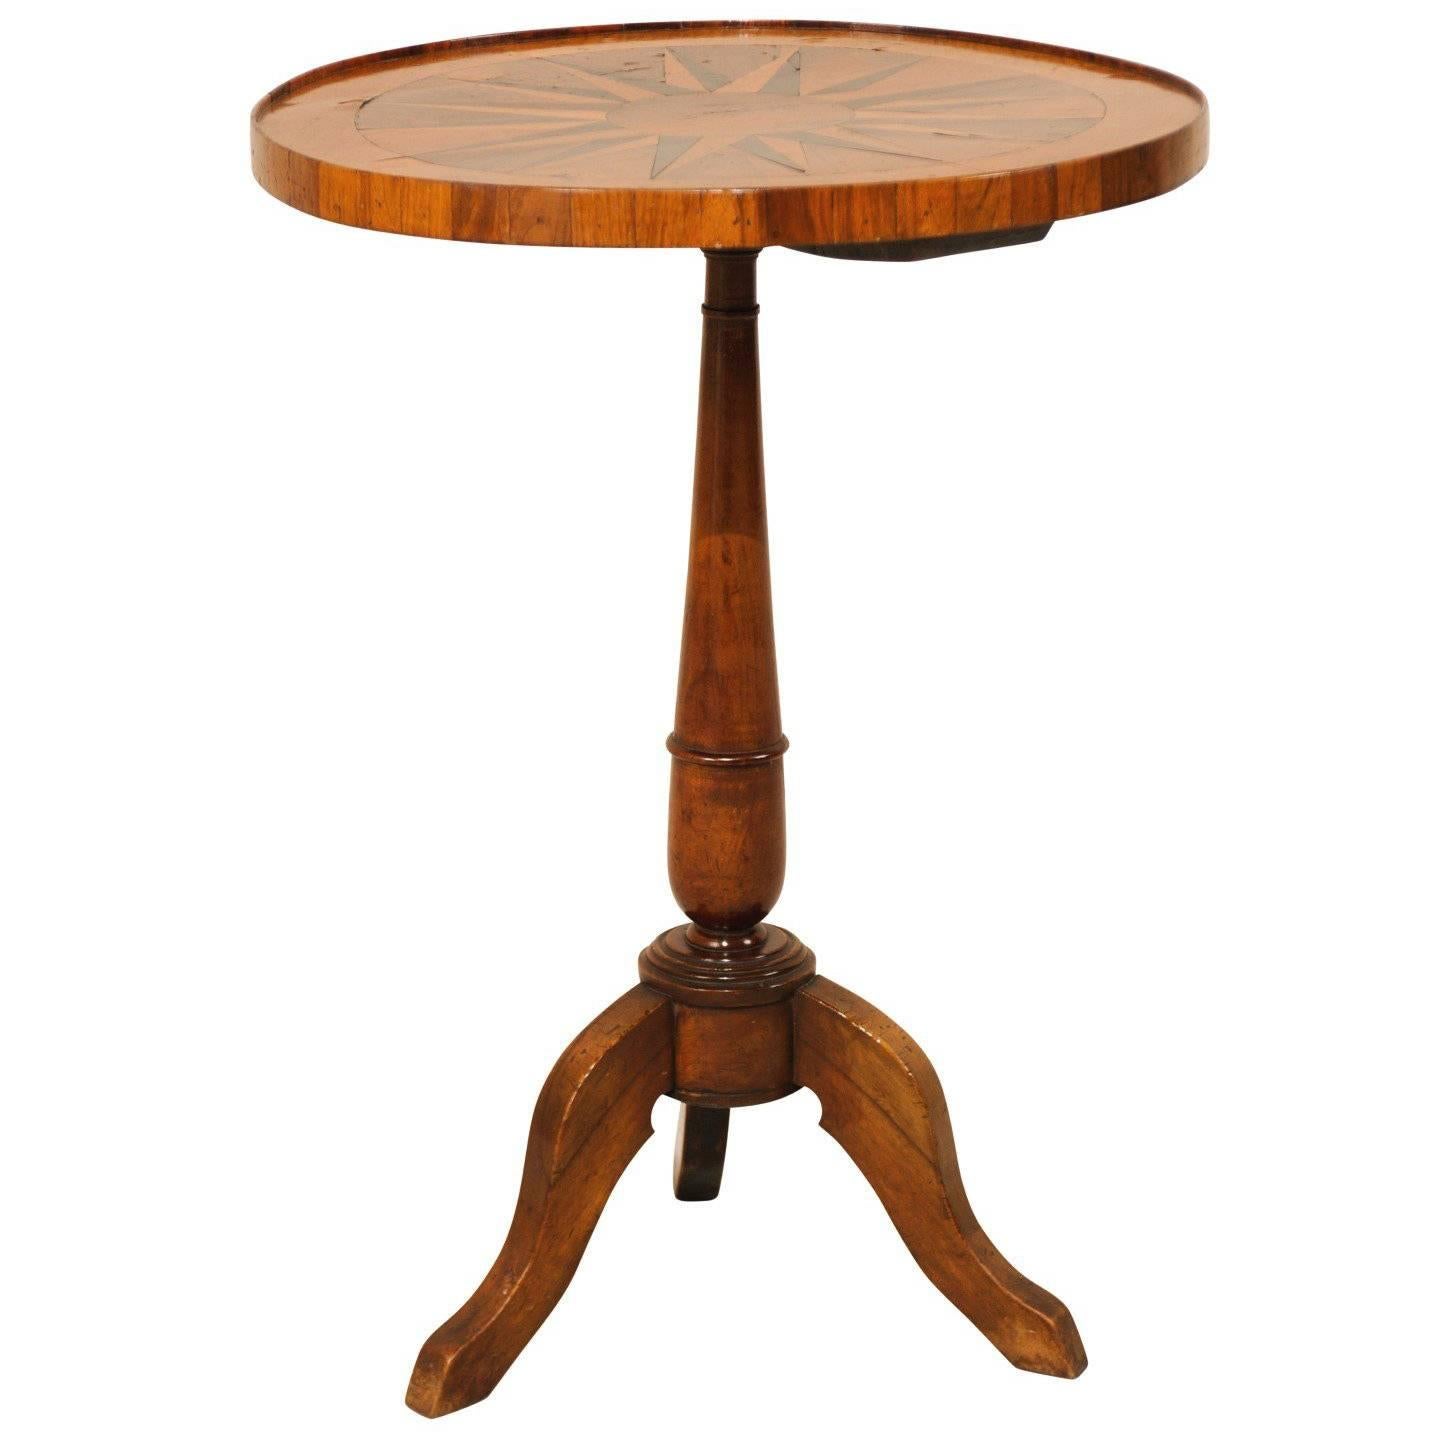 Italian 19th Century Round Fruitwood Pedestal Table with Compass Star Inlay